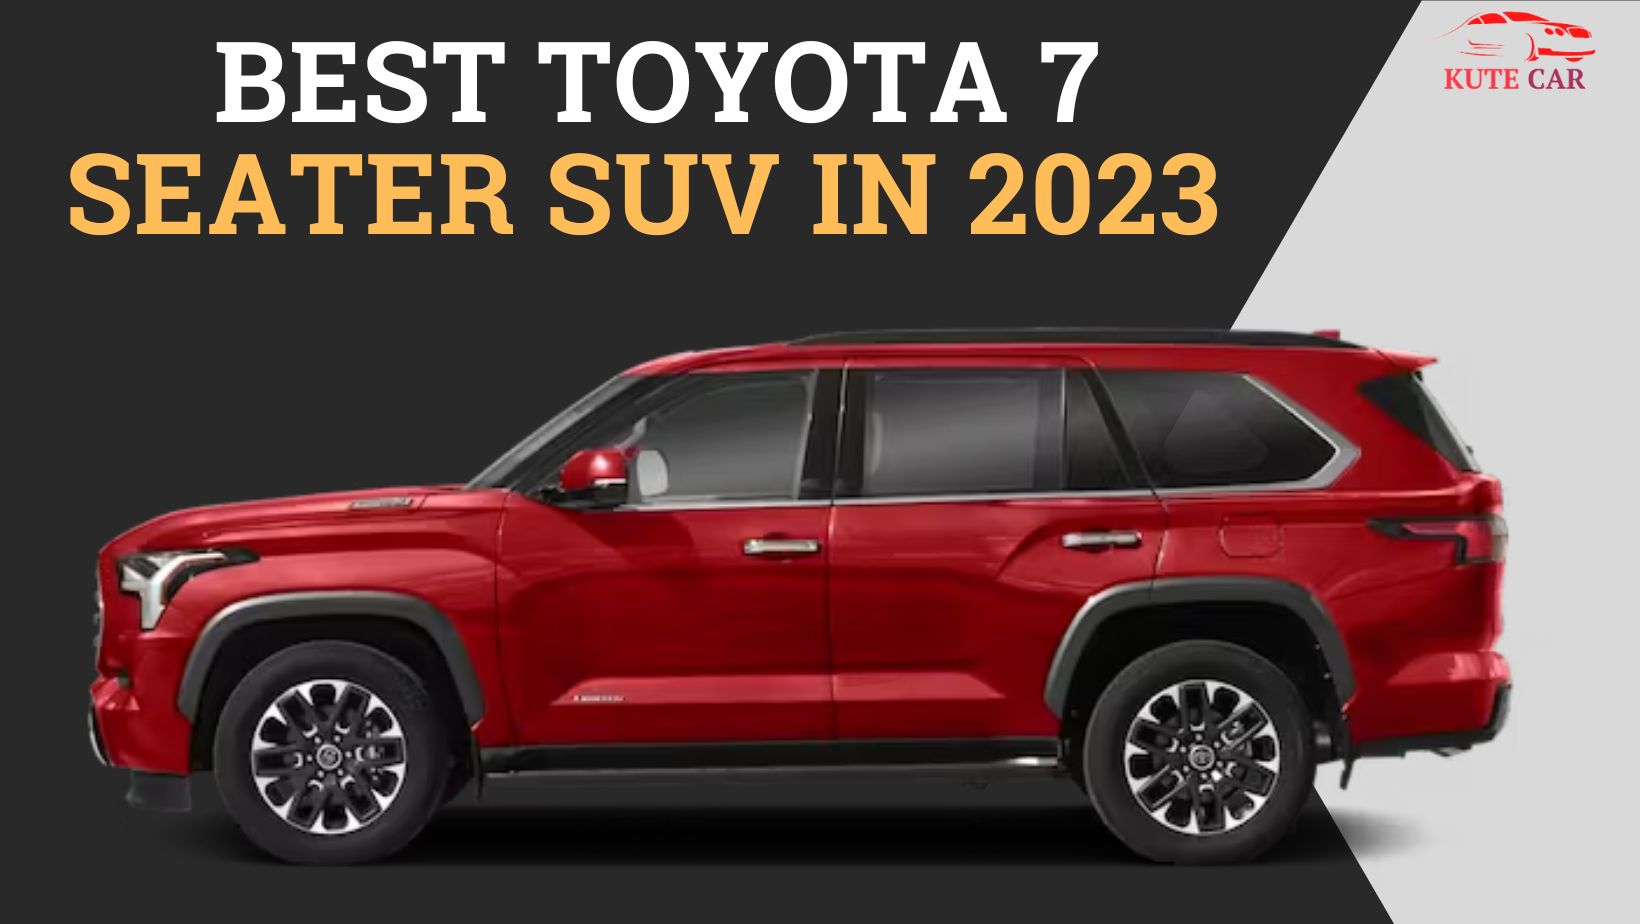 The Best Toyota 7 Seater Suv In 2023 Travel With Style And Comfort